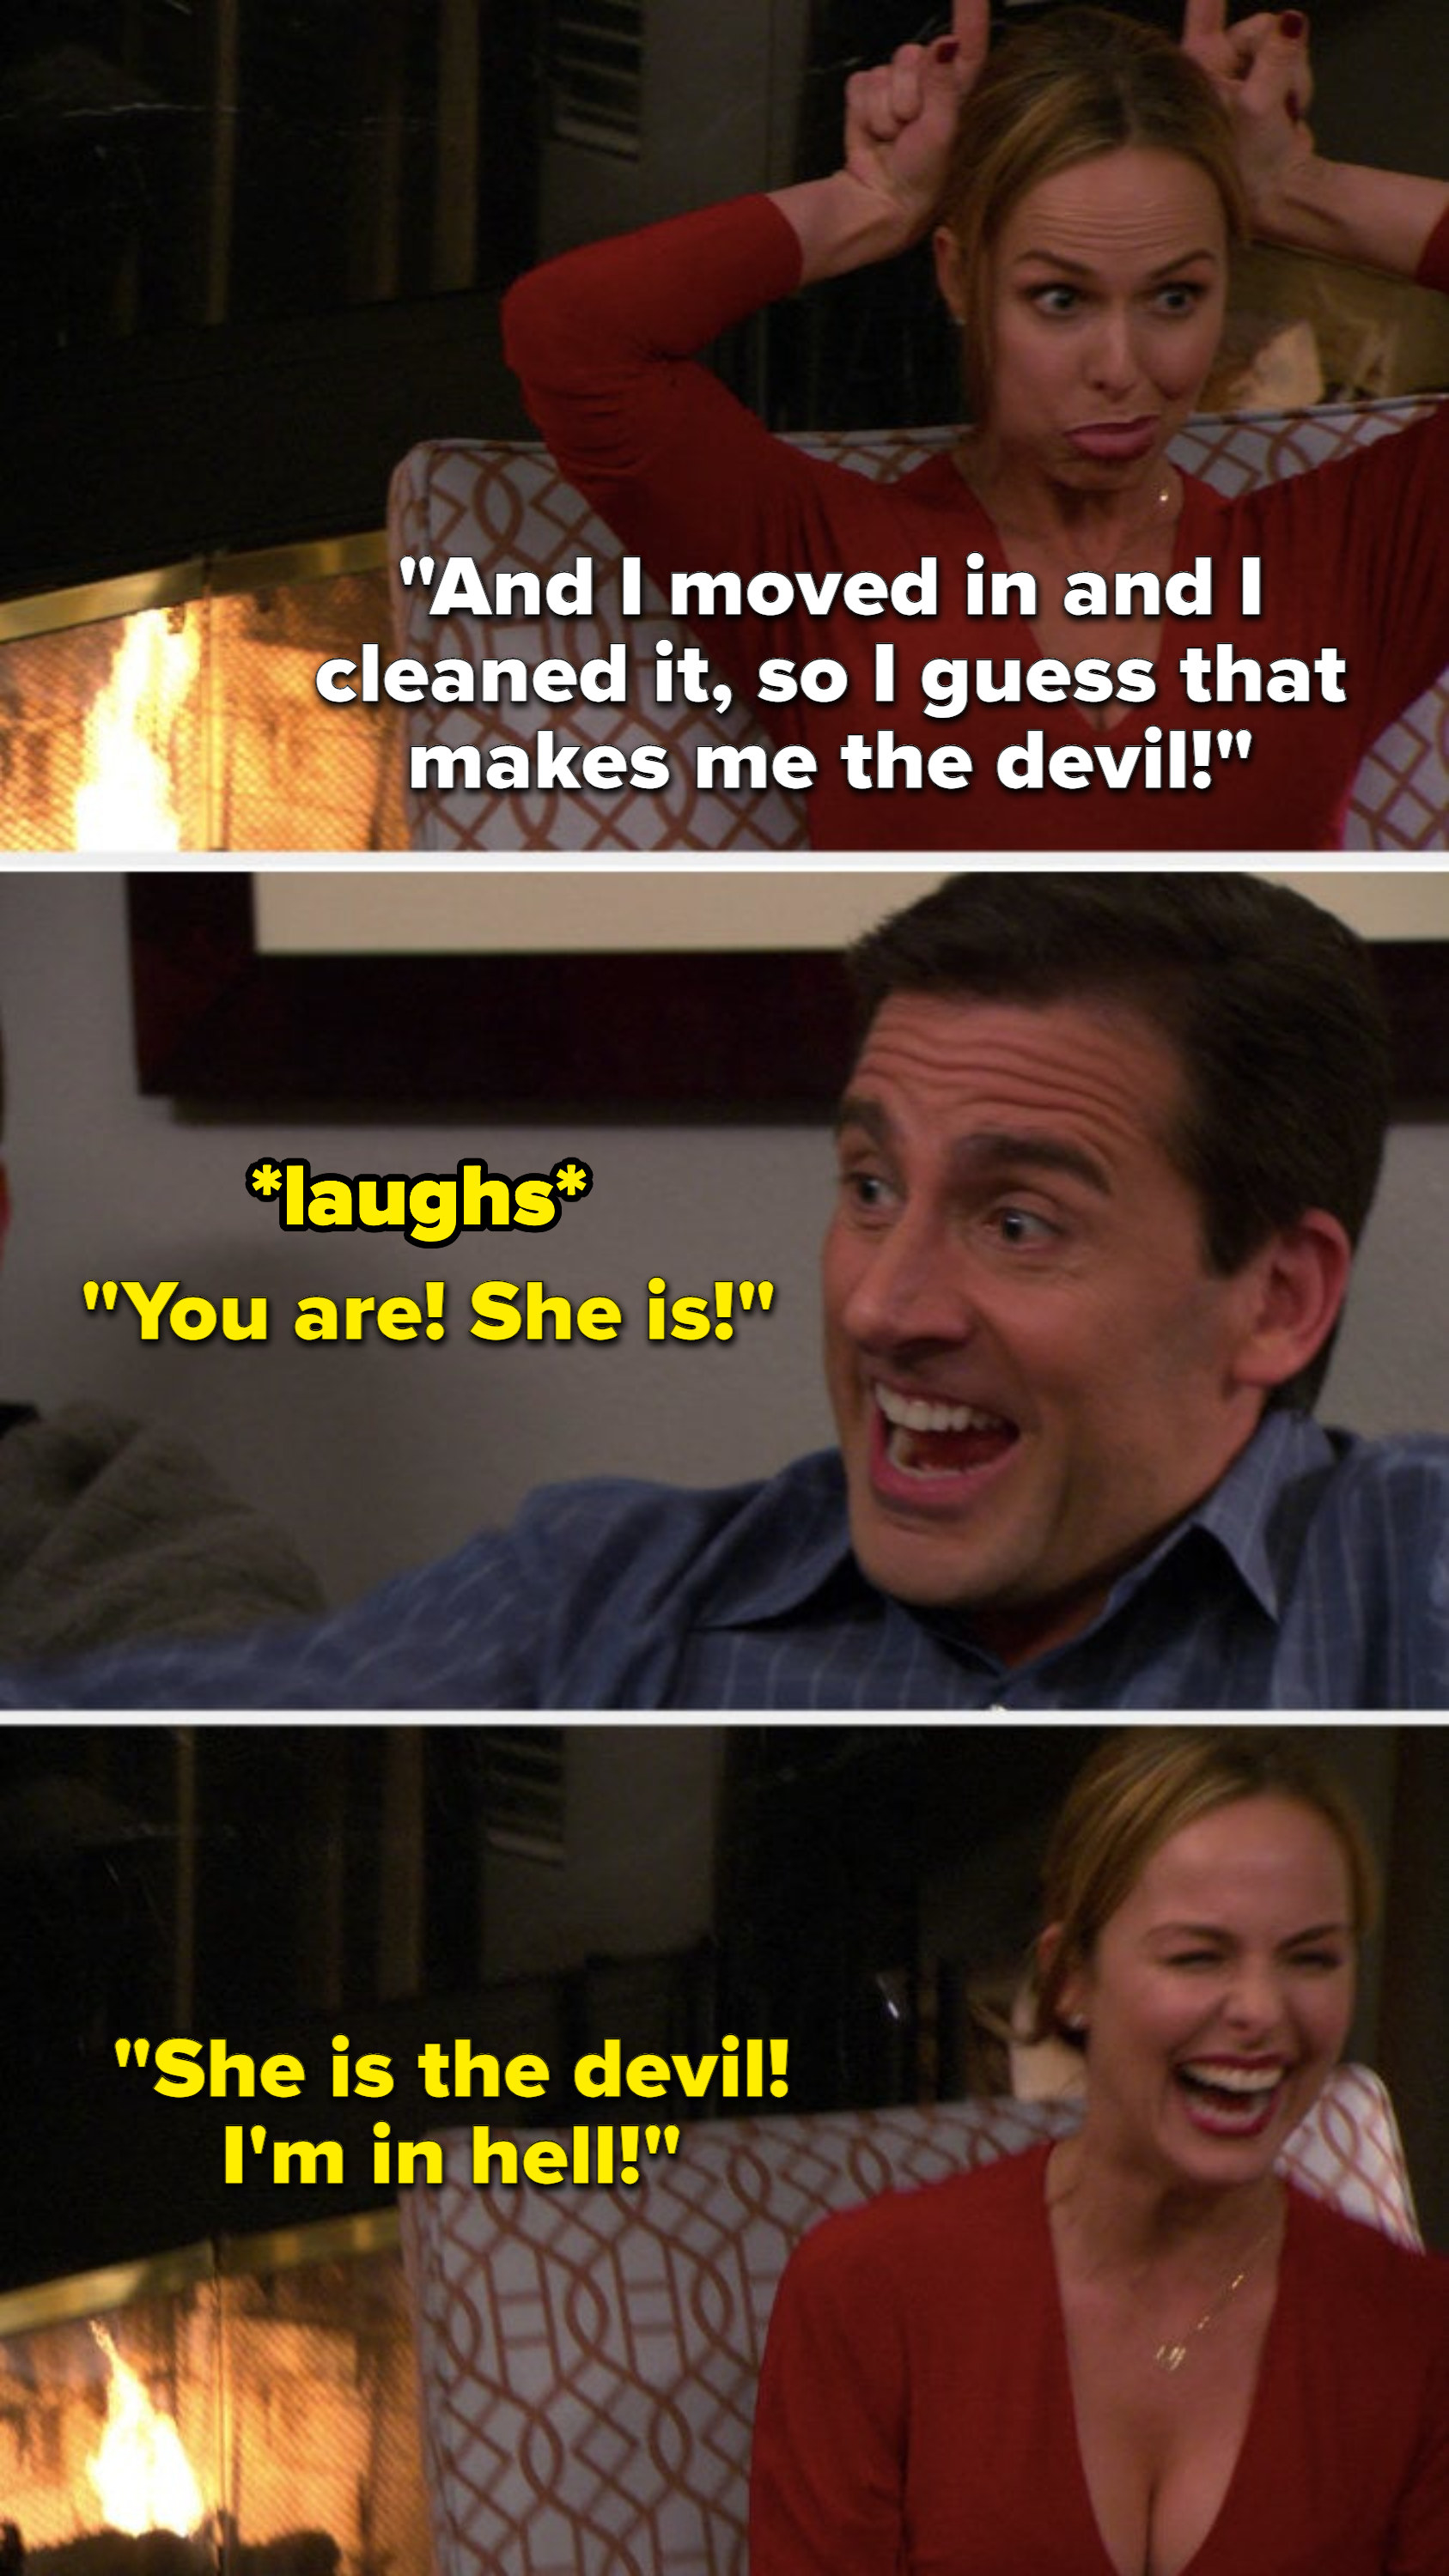 Jan says, And I moved in and I cleaned it, so I guess that makes me the devil, Michael laughs and says, You are, she is, she is the devil, I&#x27;m in hell, and Jan fake laughs hard